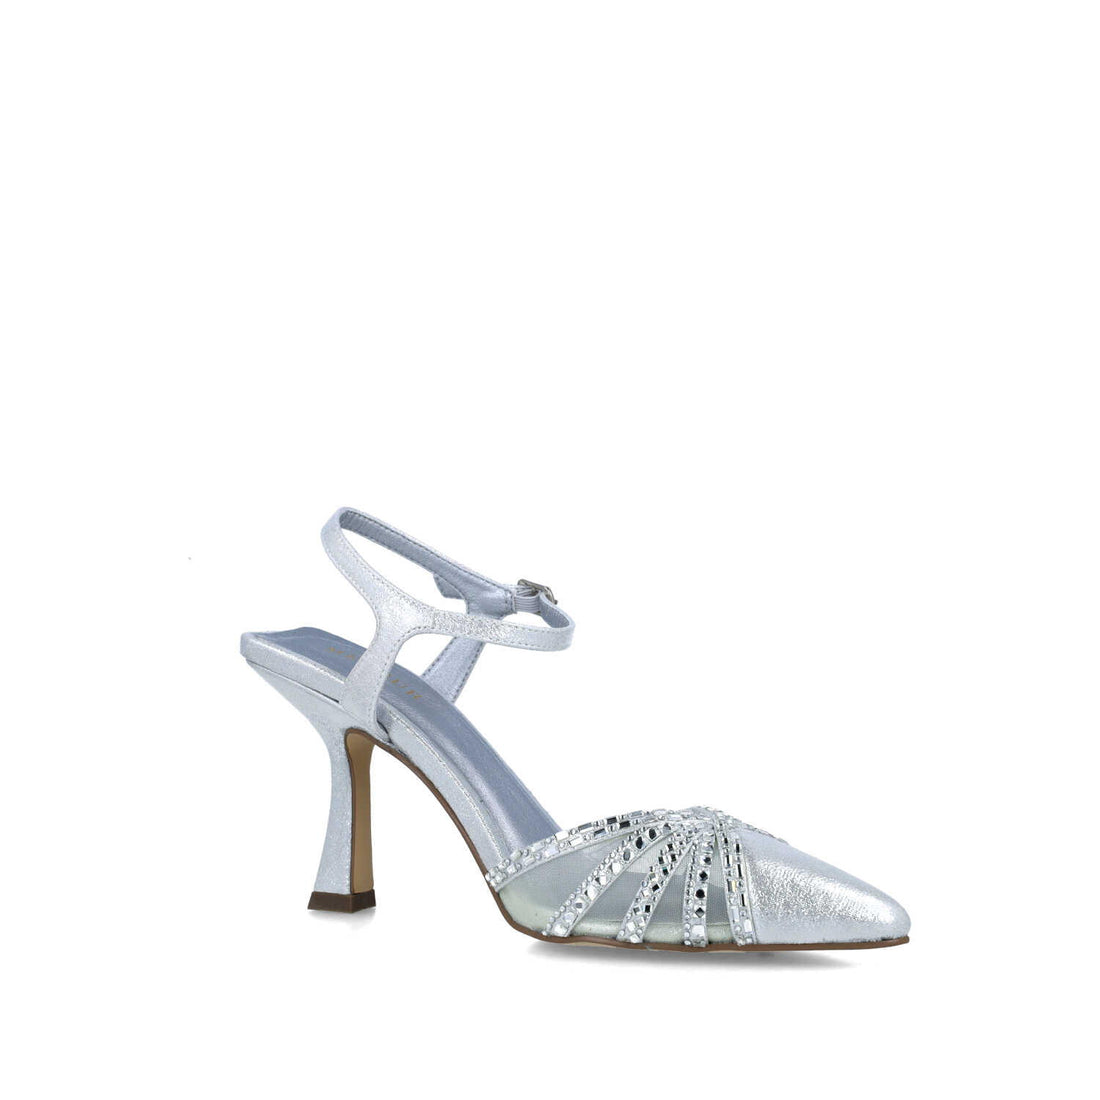 Silver Pumps With Ankle Strap_24734_09_02